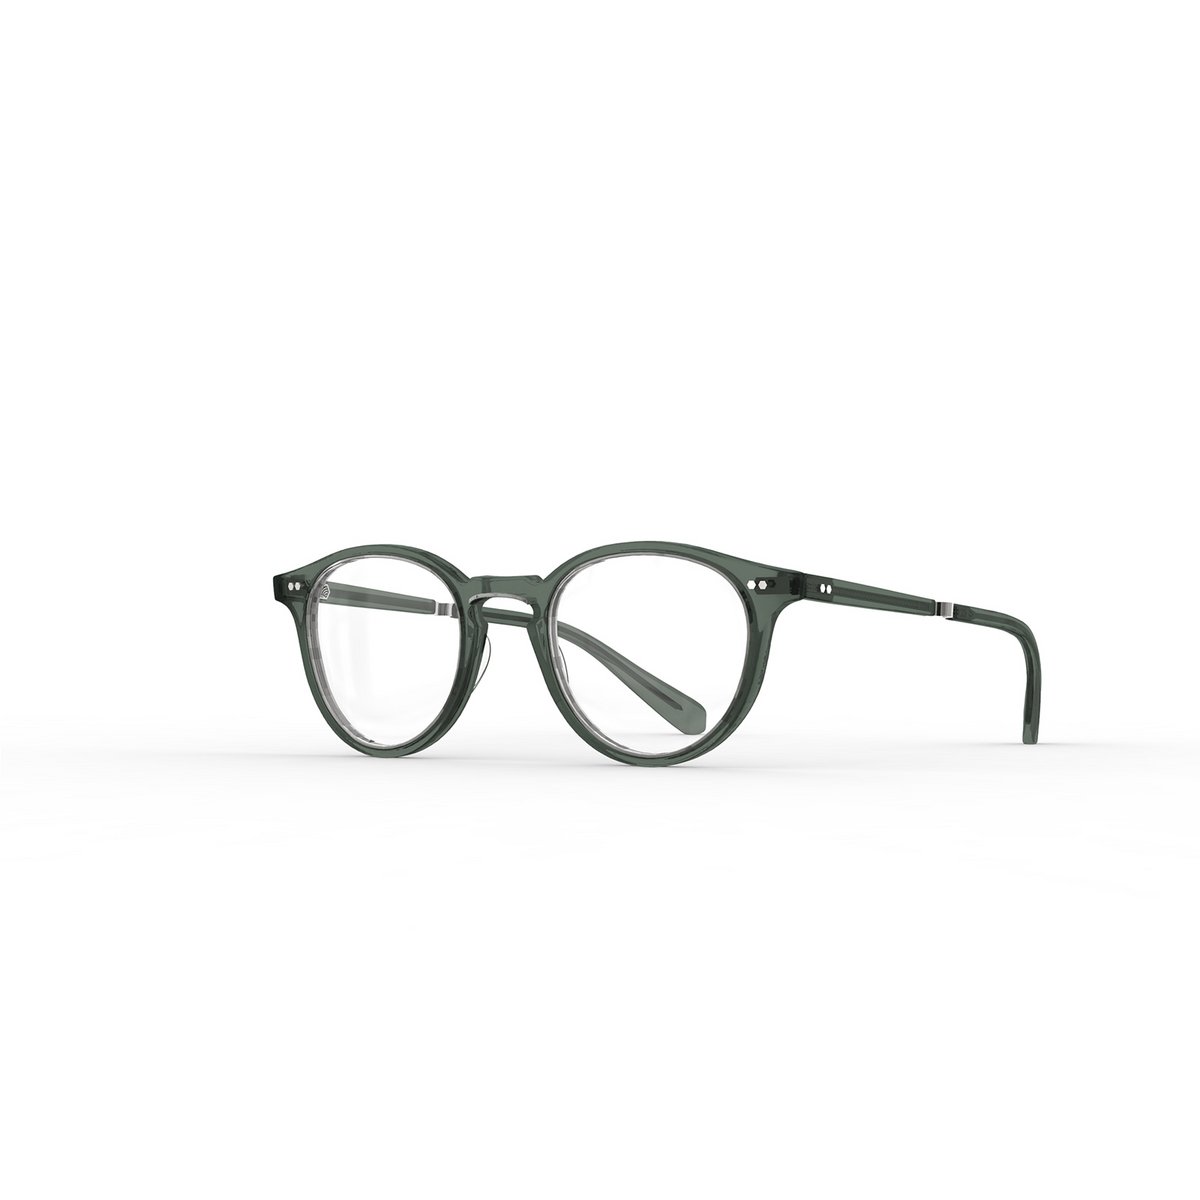 Mr. Leight® Round Eyeglasses: Marmont Ii C color Grey Sage-pewter Grys-pw - three-quarters view.